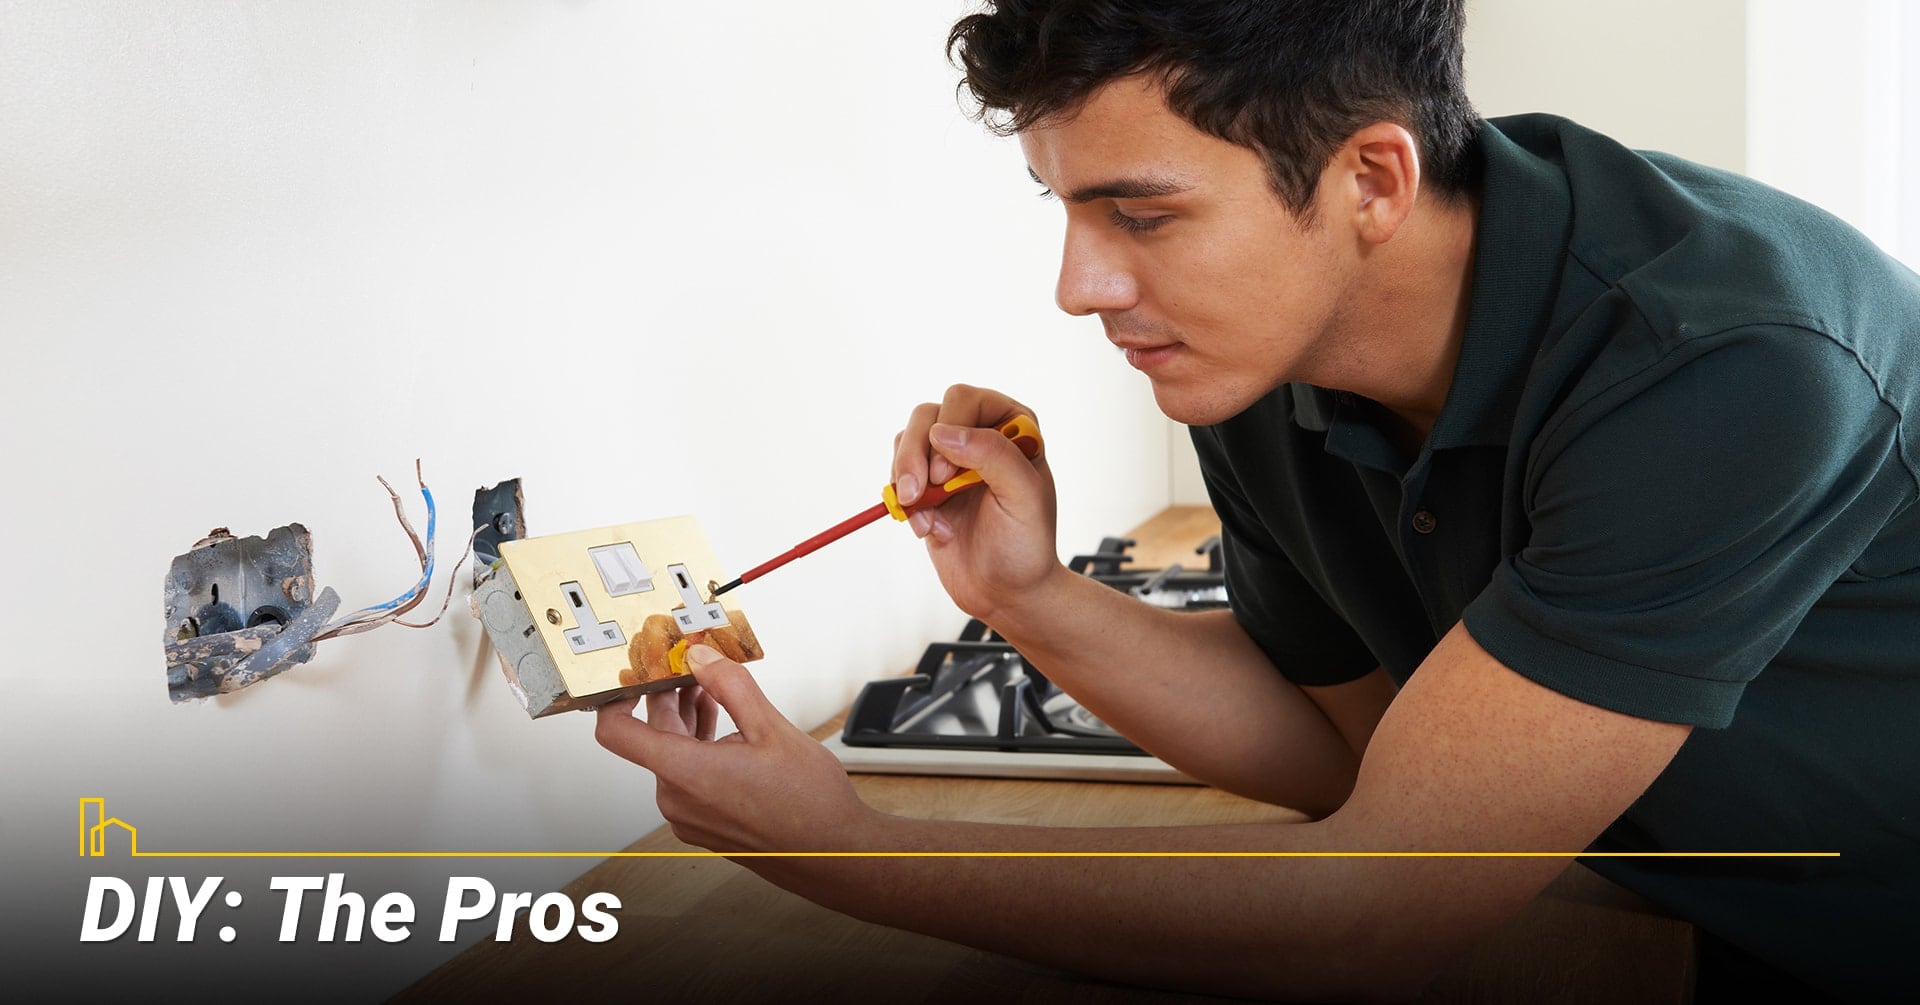 DIY: The Pros, the advantage of doing it yourself